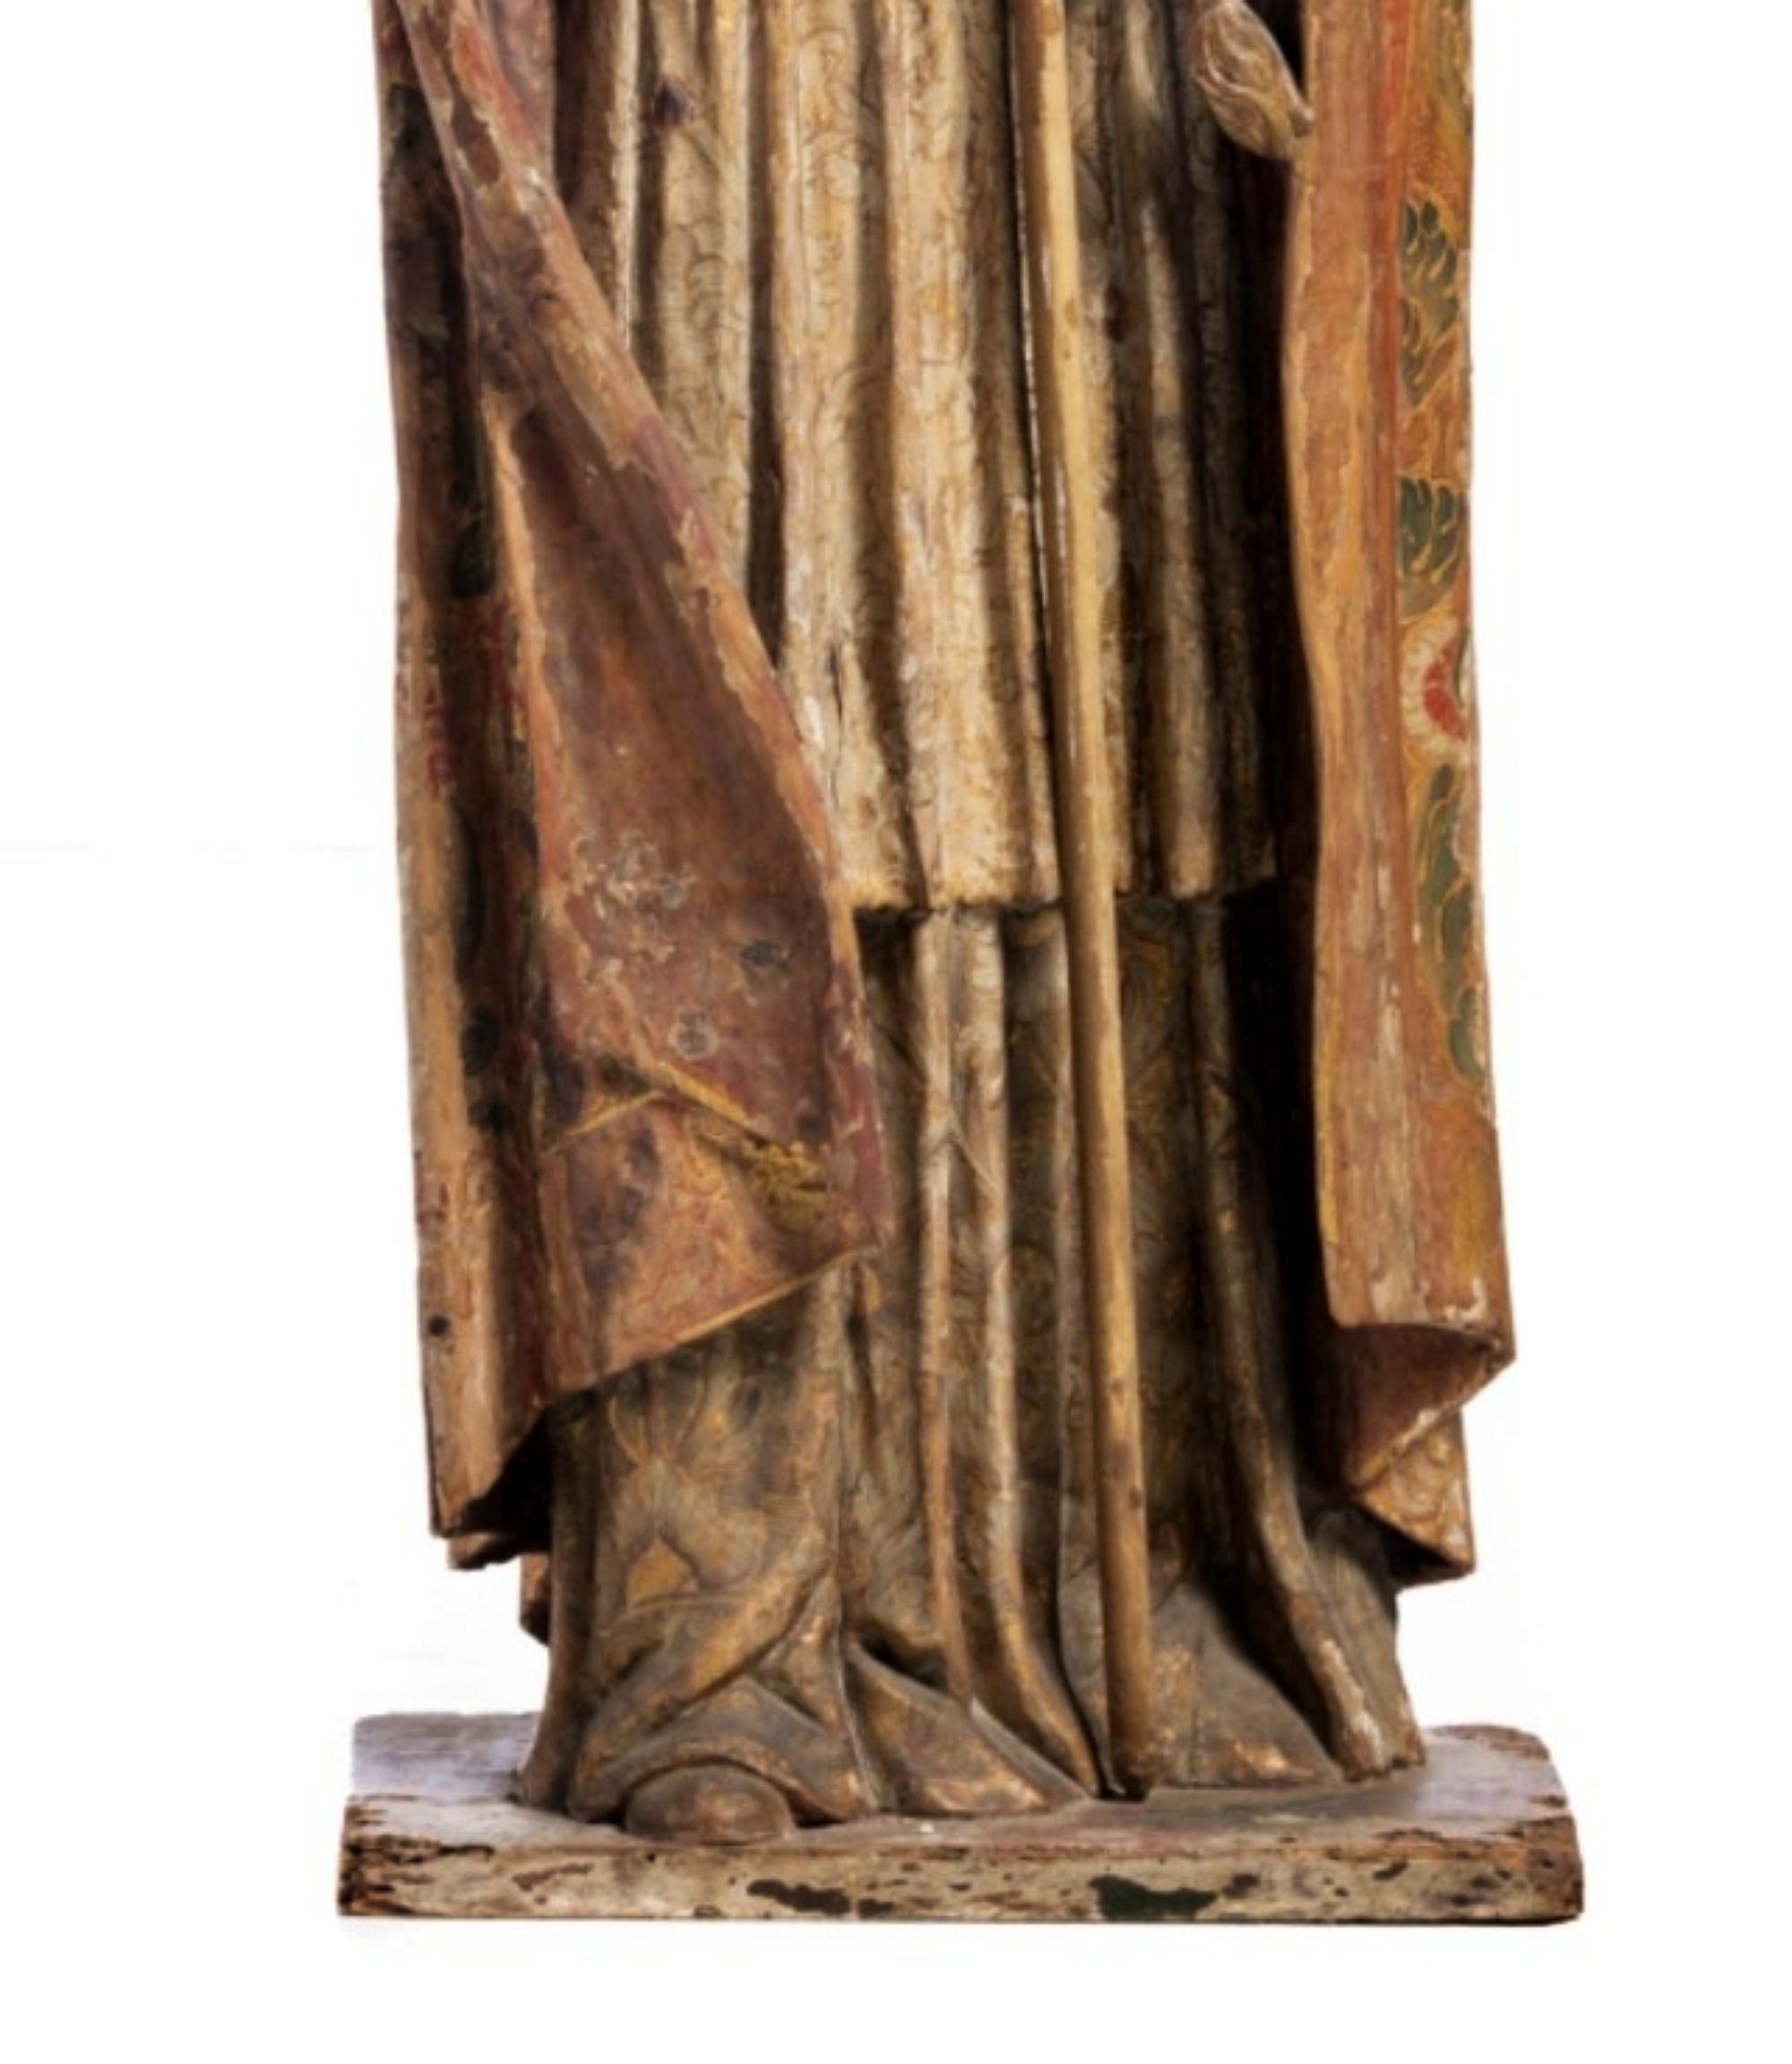 Holy Bishop sculpture 18th century

Portuguese sculpture, from the 18th century. 
in upholstered, polychrome and gilded wood.
Fingers flaws. faults and defects,
Measure: Height: (total) 122 cm
Good condition for the age.